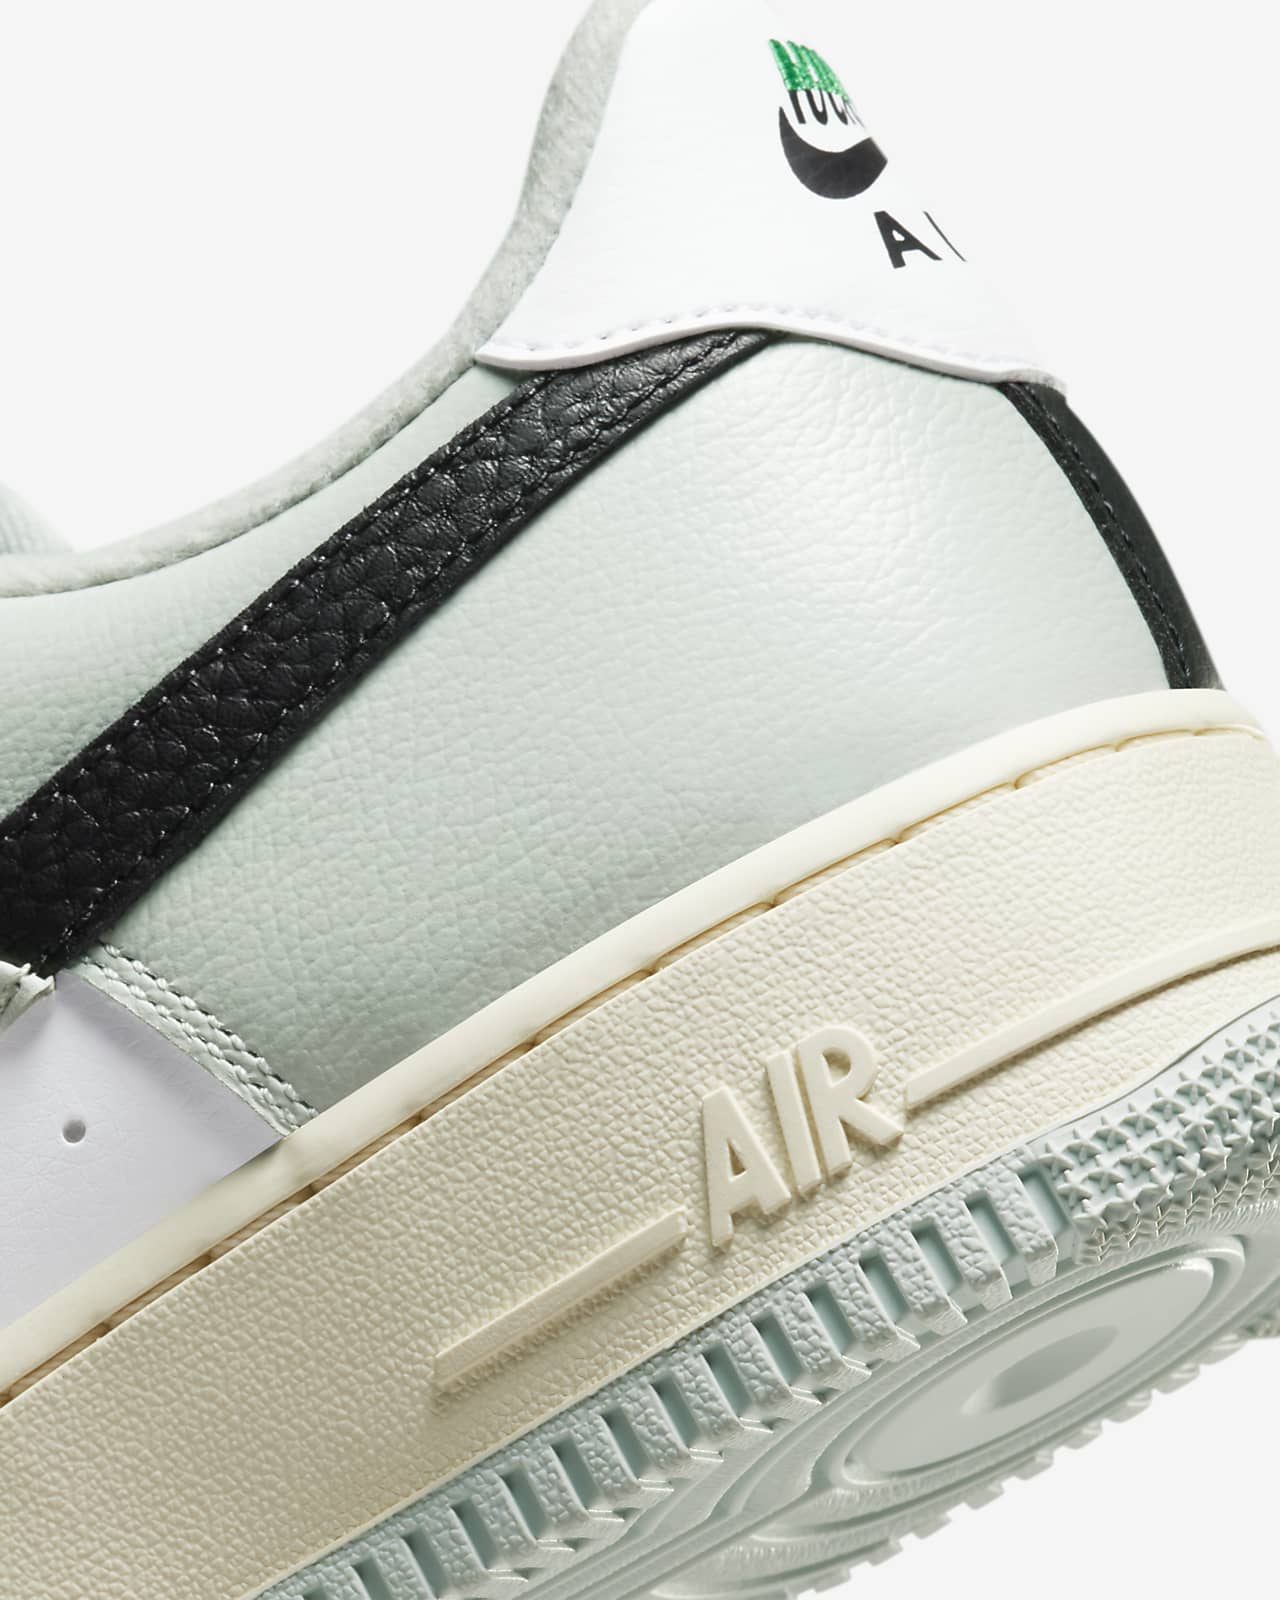 Nike Air Force 1 LV8 Men's Shoes.